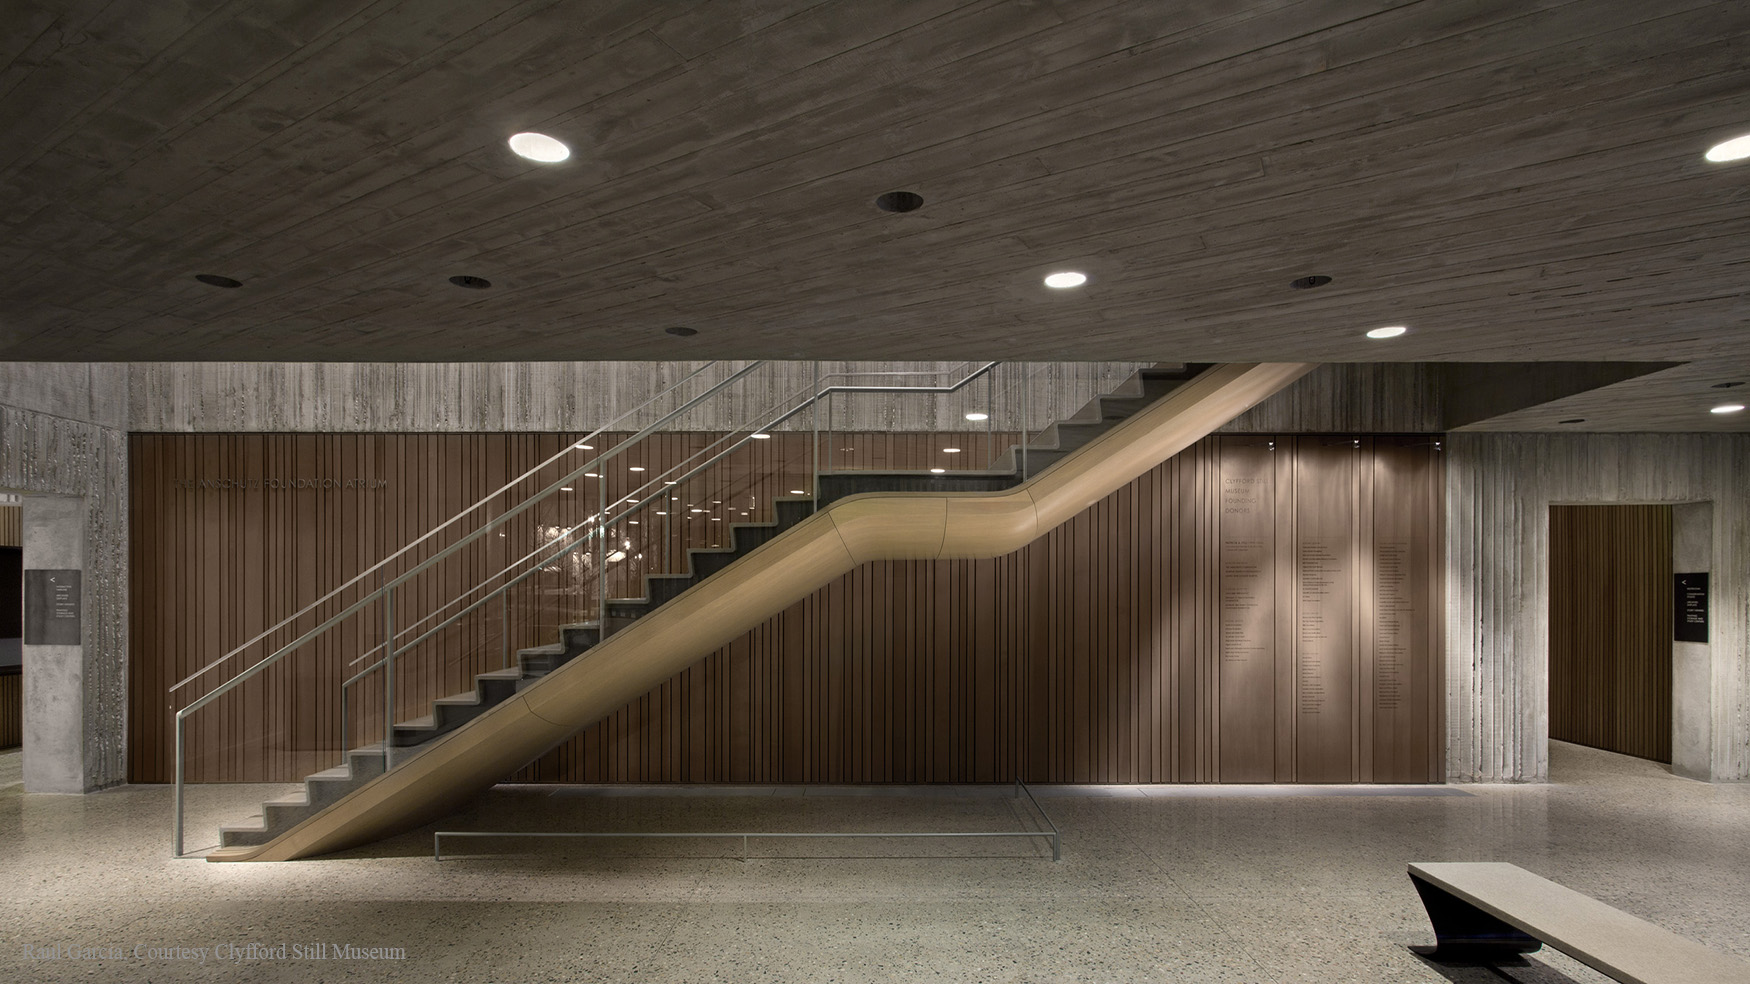 Staircase in the Clyfford Still Museum lobby